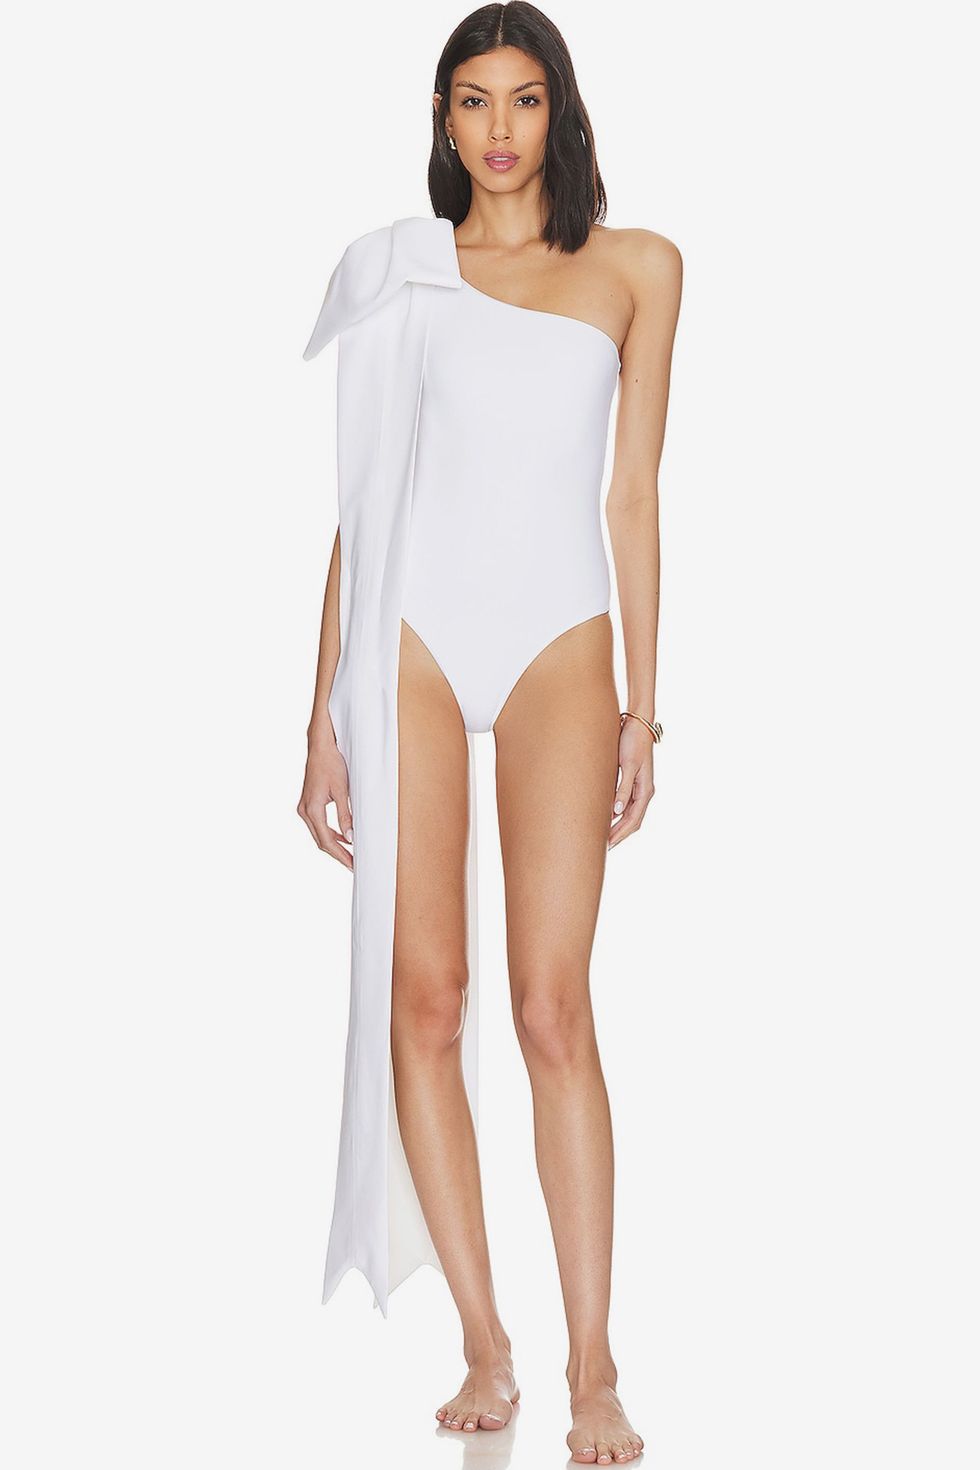 Milly One Piece in White